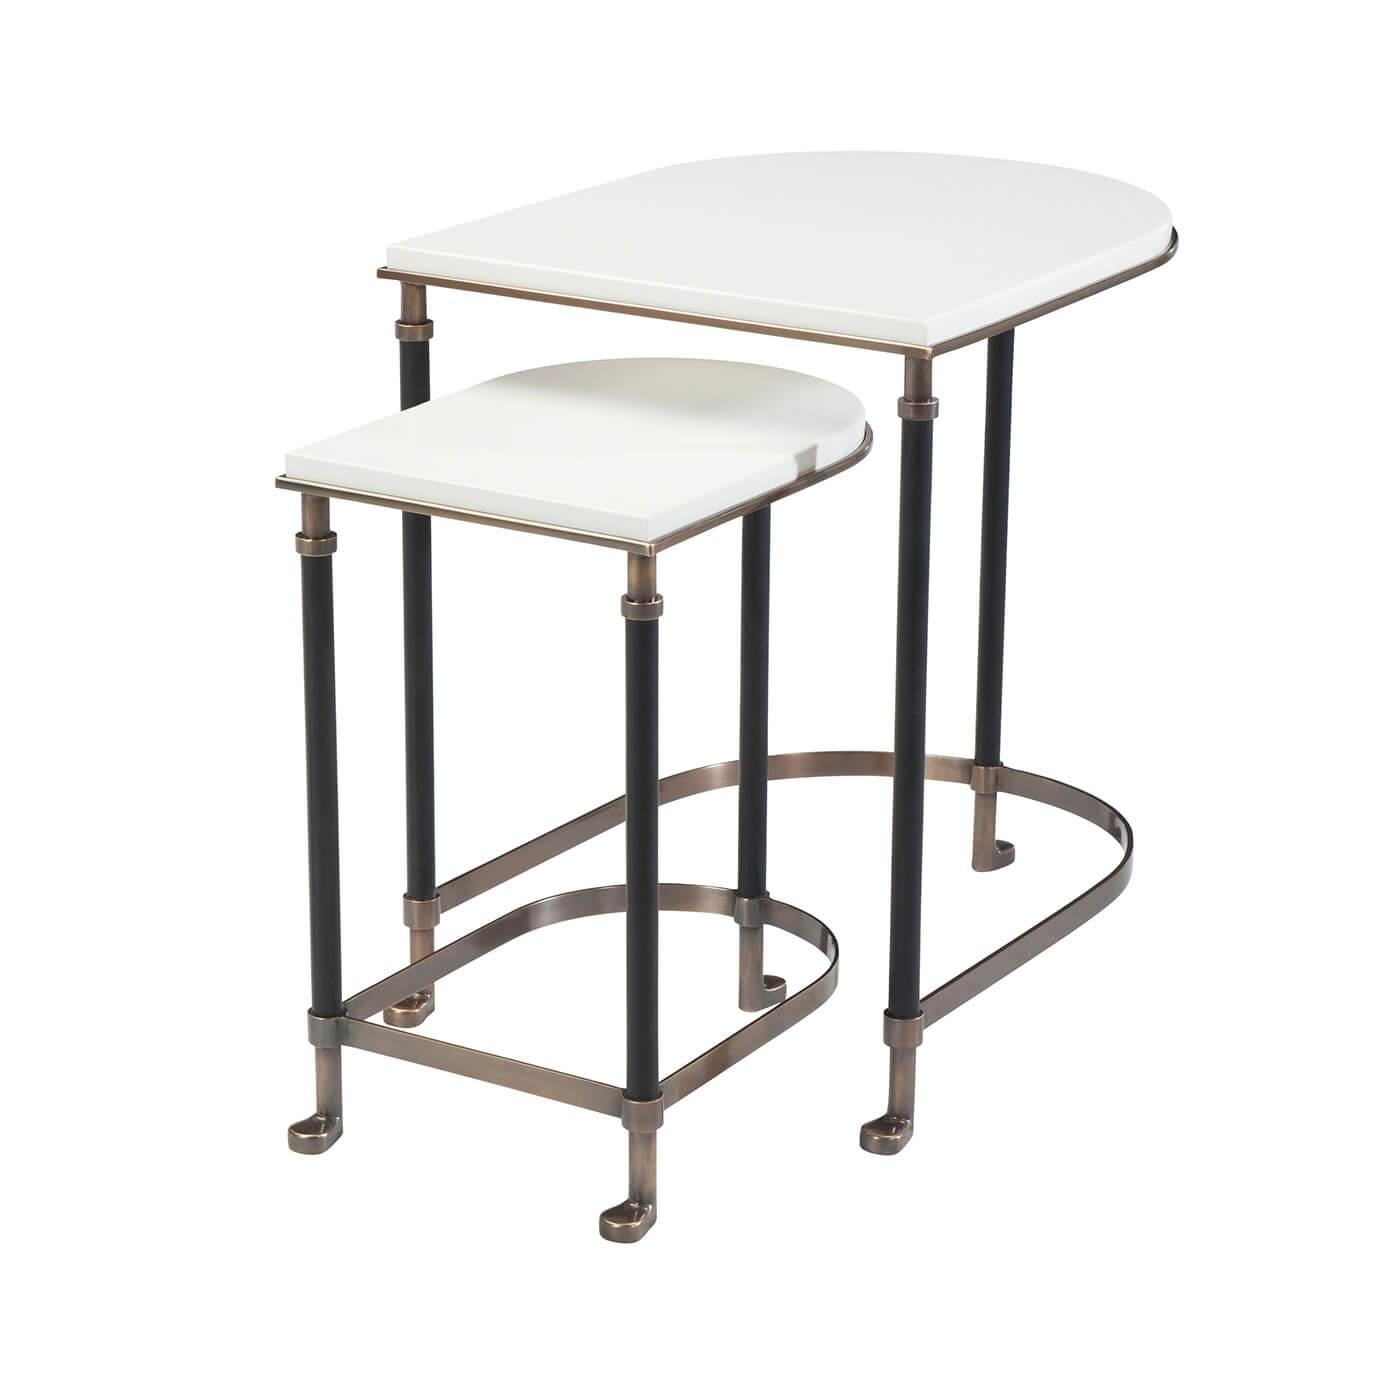 Modern set of two nesting tables with brass frame, ivory lacquer tops and leather-wrapped supports. 

Dimensions: 20